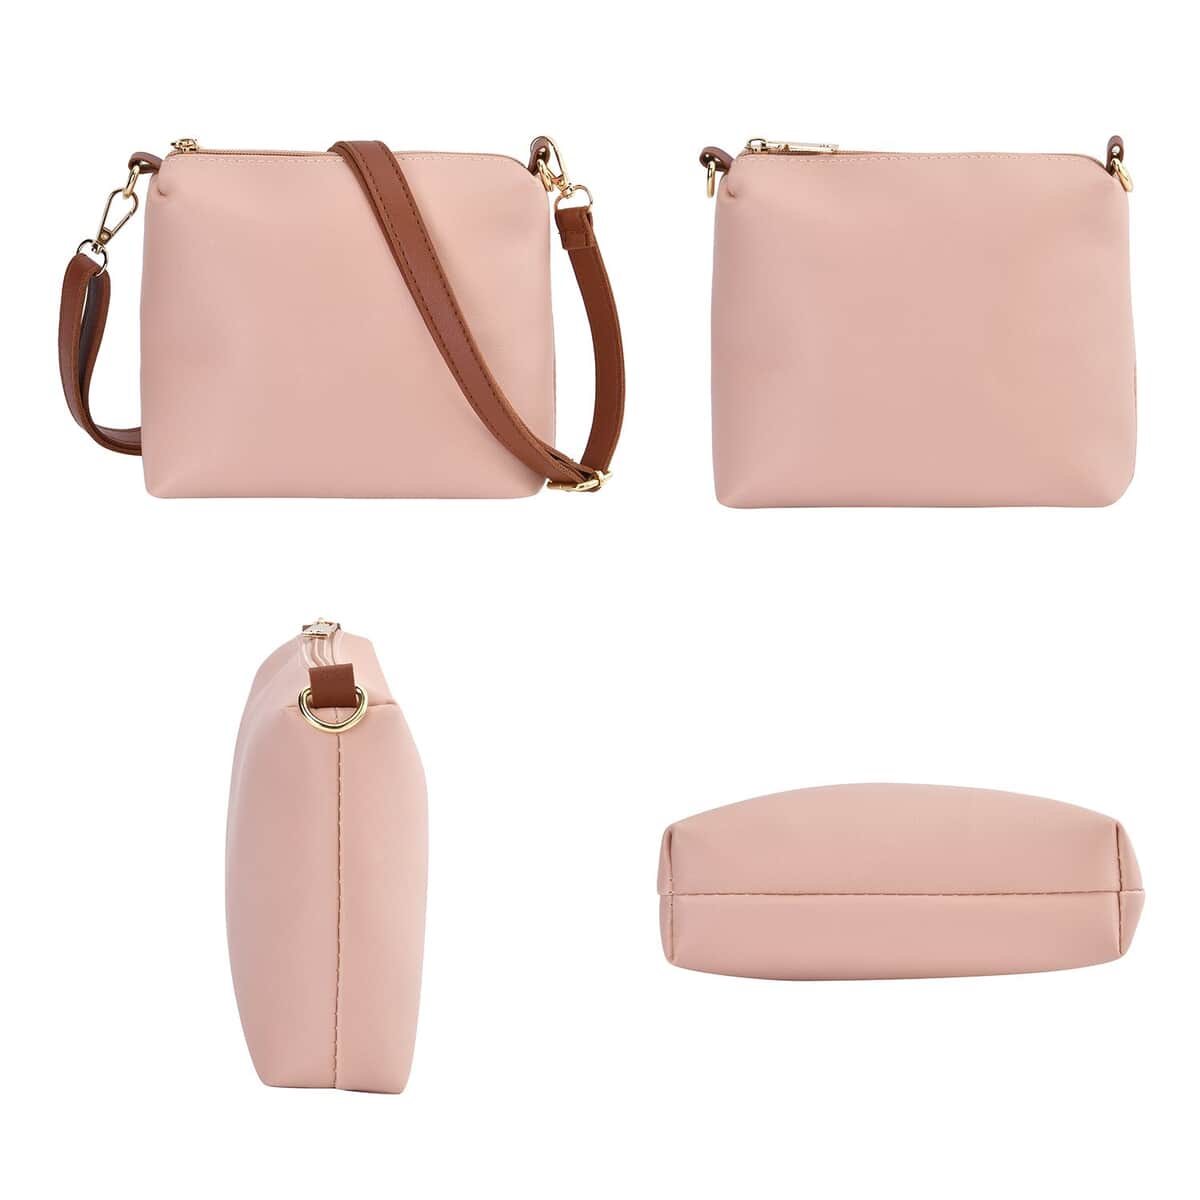 Set of 4 Pink Faux Leather Convertible Bag (9.84"x5.12"x9.84") with Crossbody Bag (9.06"x1.18"x5.91") Clutch Bag (7.87"x4.72") and Wallet (4.53"x2.76") image number 2